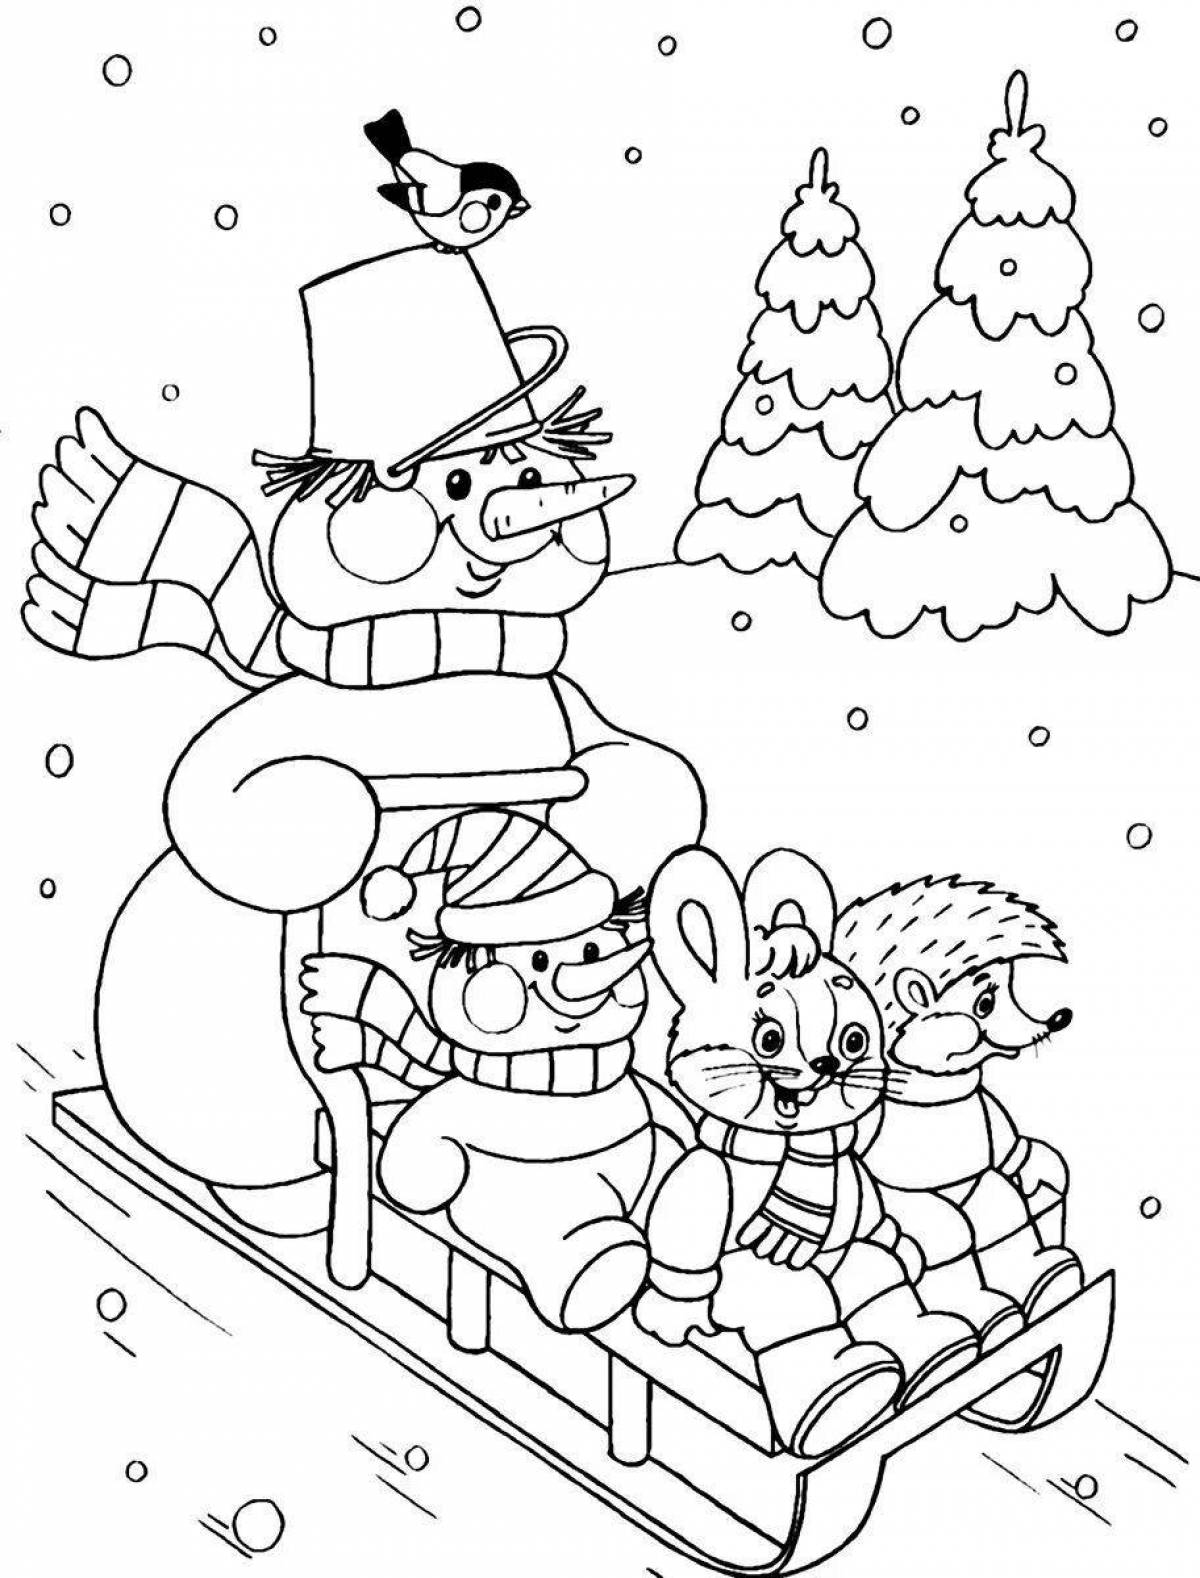 Glitter Christmas coloring book for 6 year olds